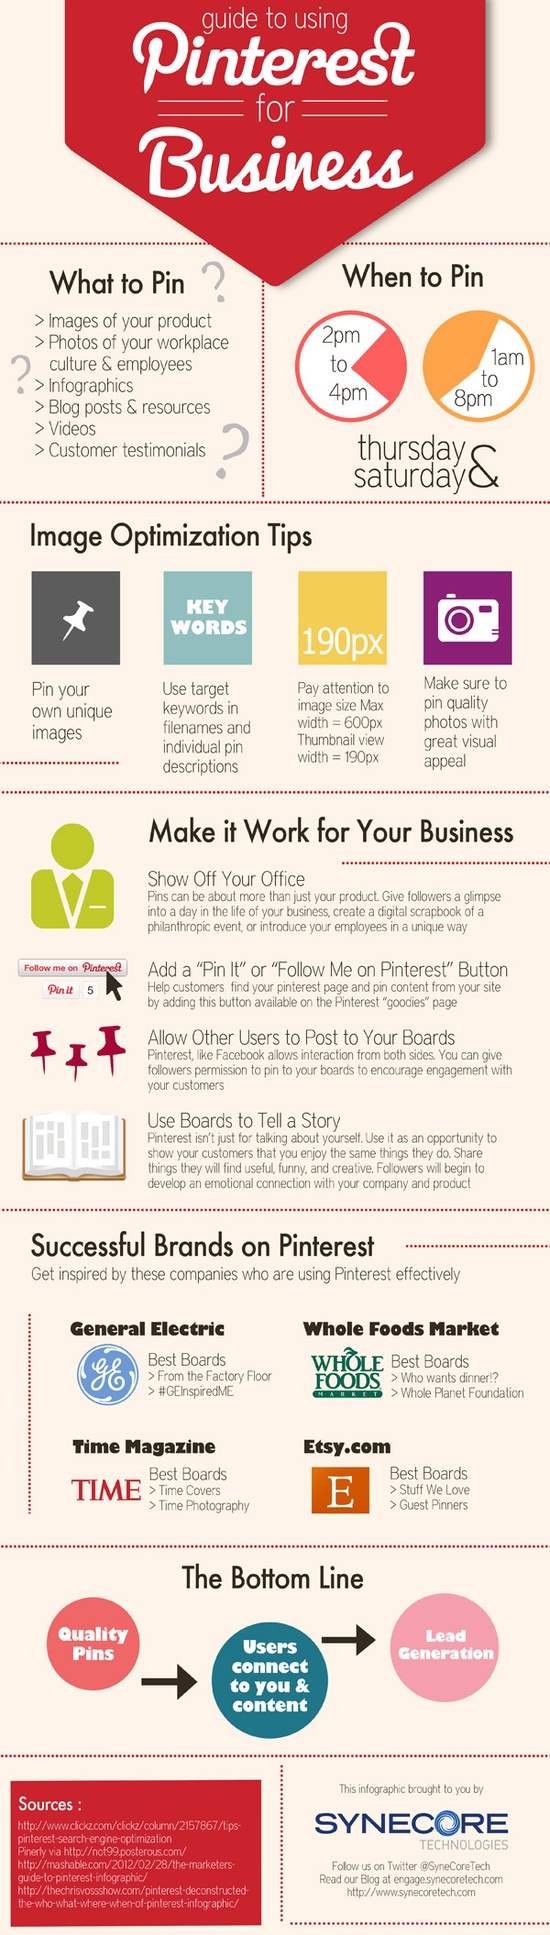 A-Guide-to-Using-Pinterest-for-Business-INFOGRAPHIC